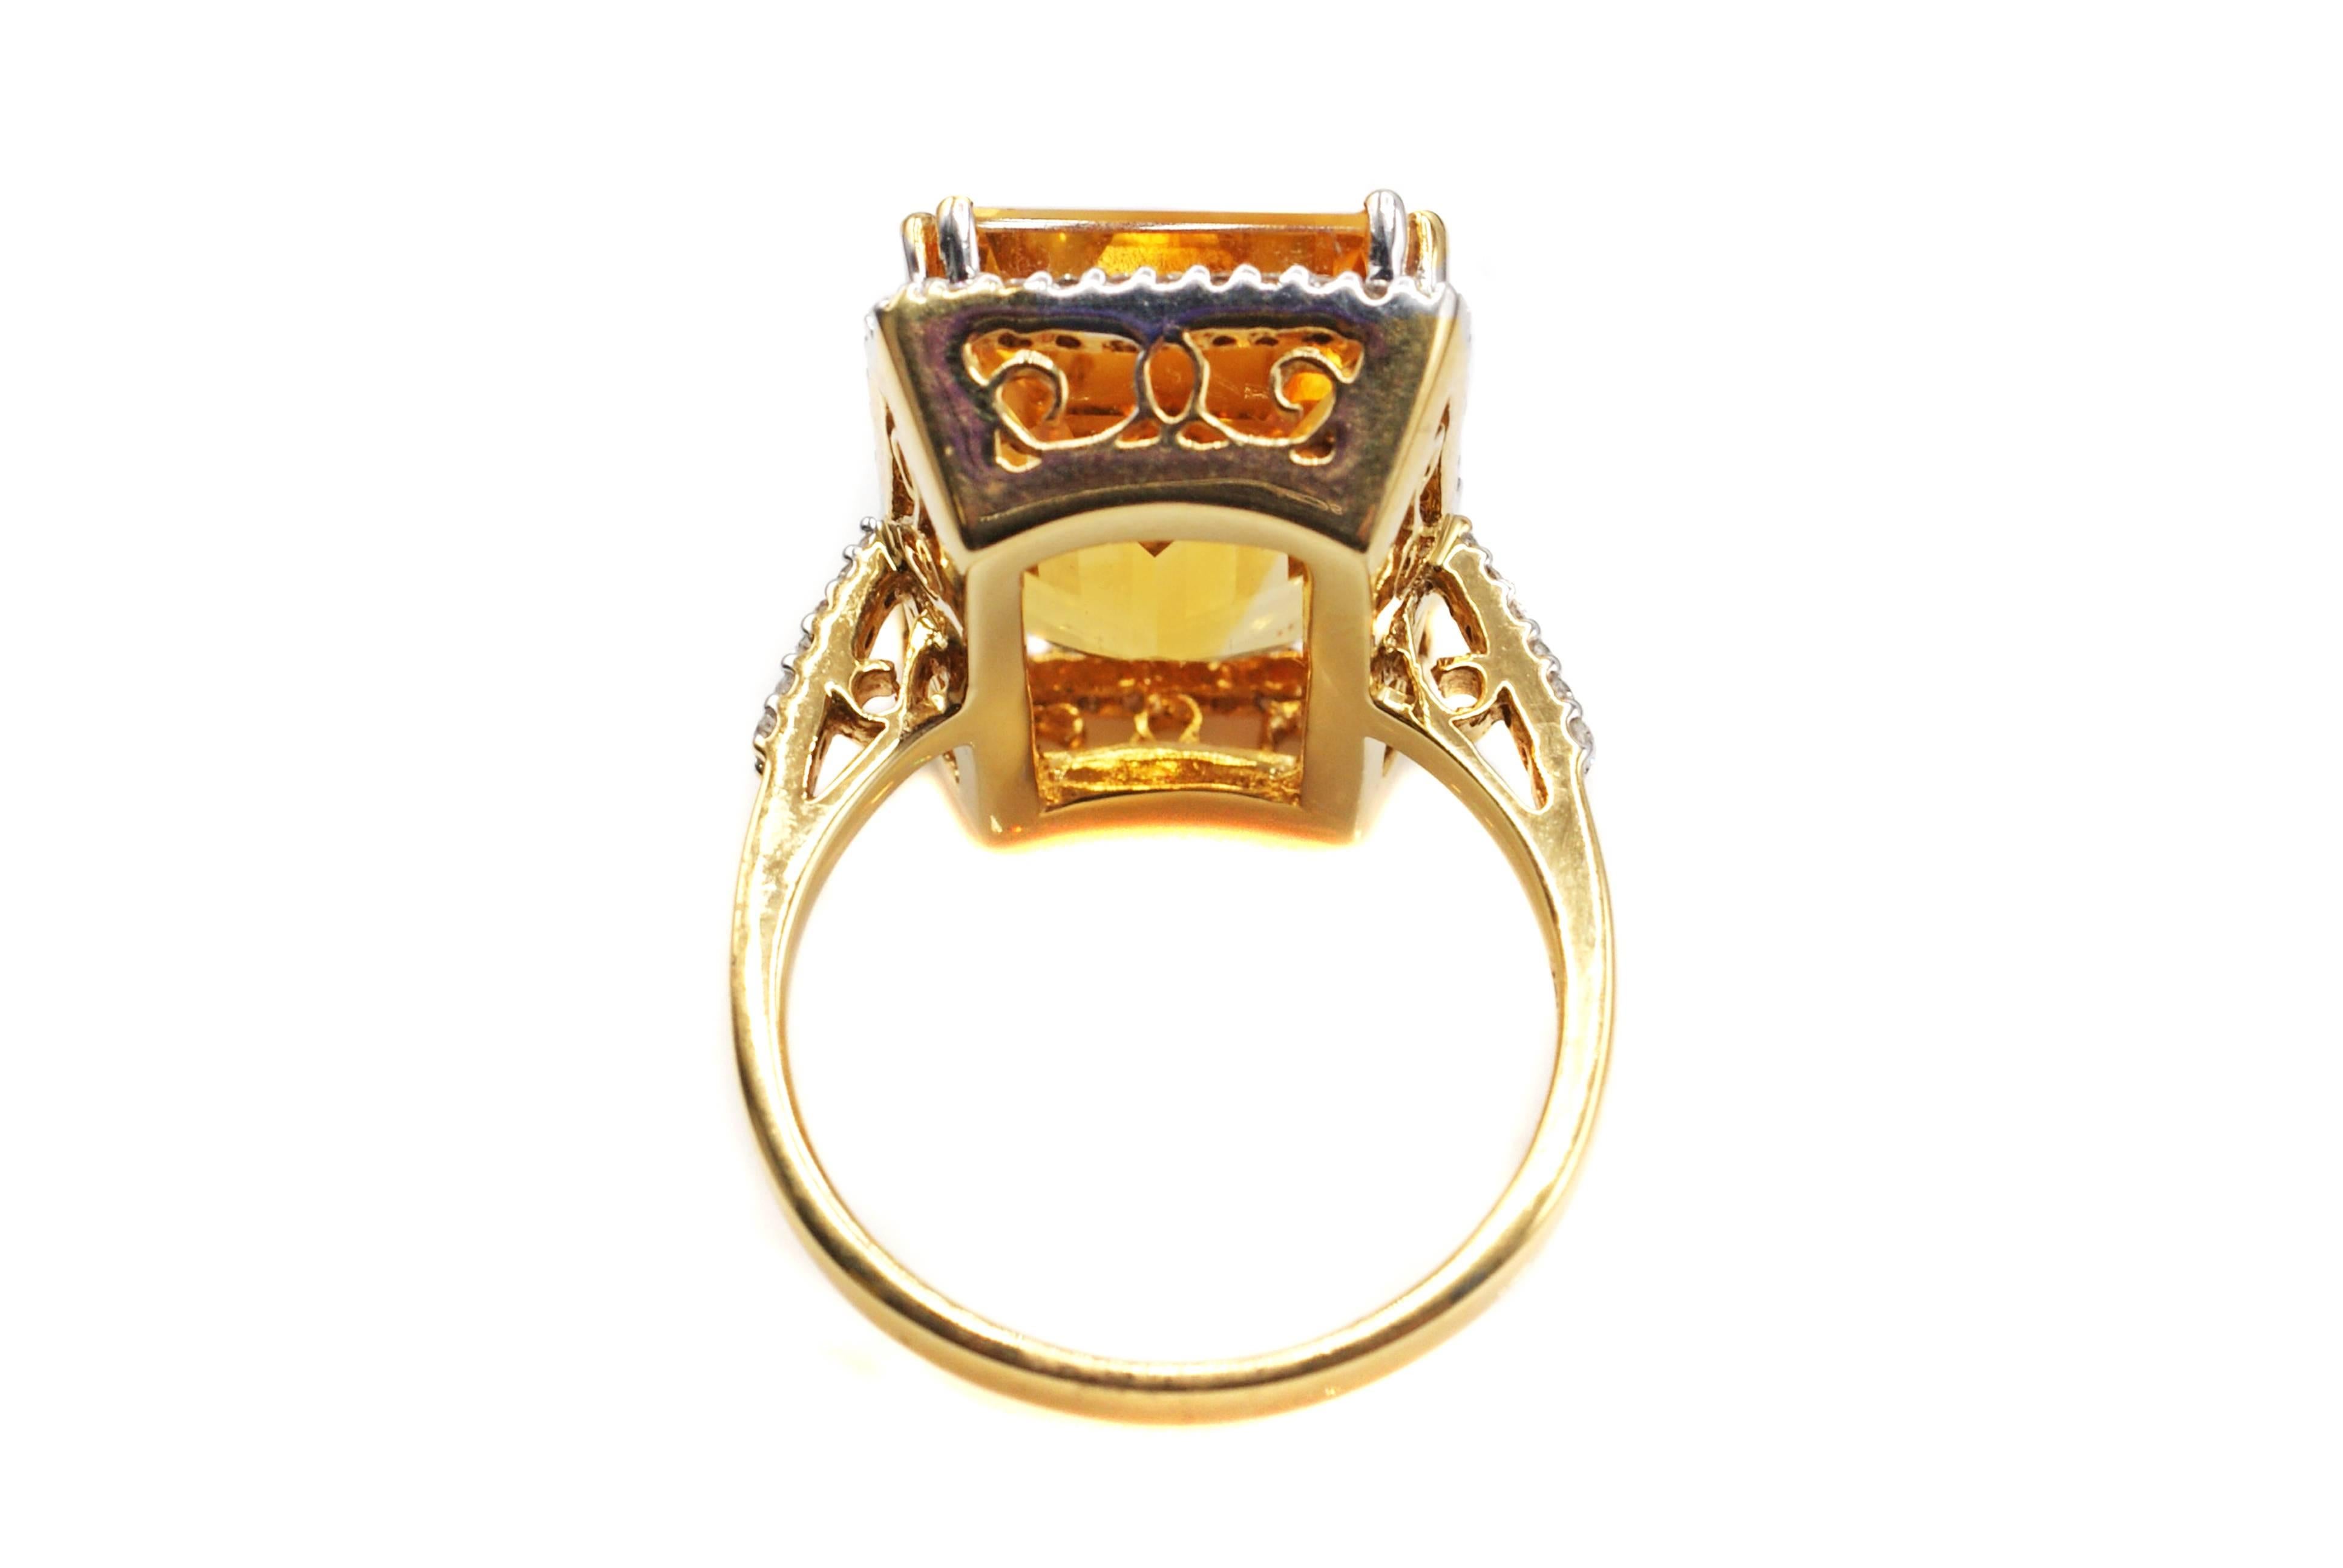 This chic 1960s handcrafted 18 karat yellow gold ring is centrally set with an extremely vibrant lively emerald cut golden citrine. This well cut gemstone displays an amazing amount of color and sparkle and is embellished by a fine halo of tiny